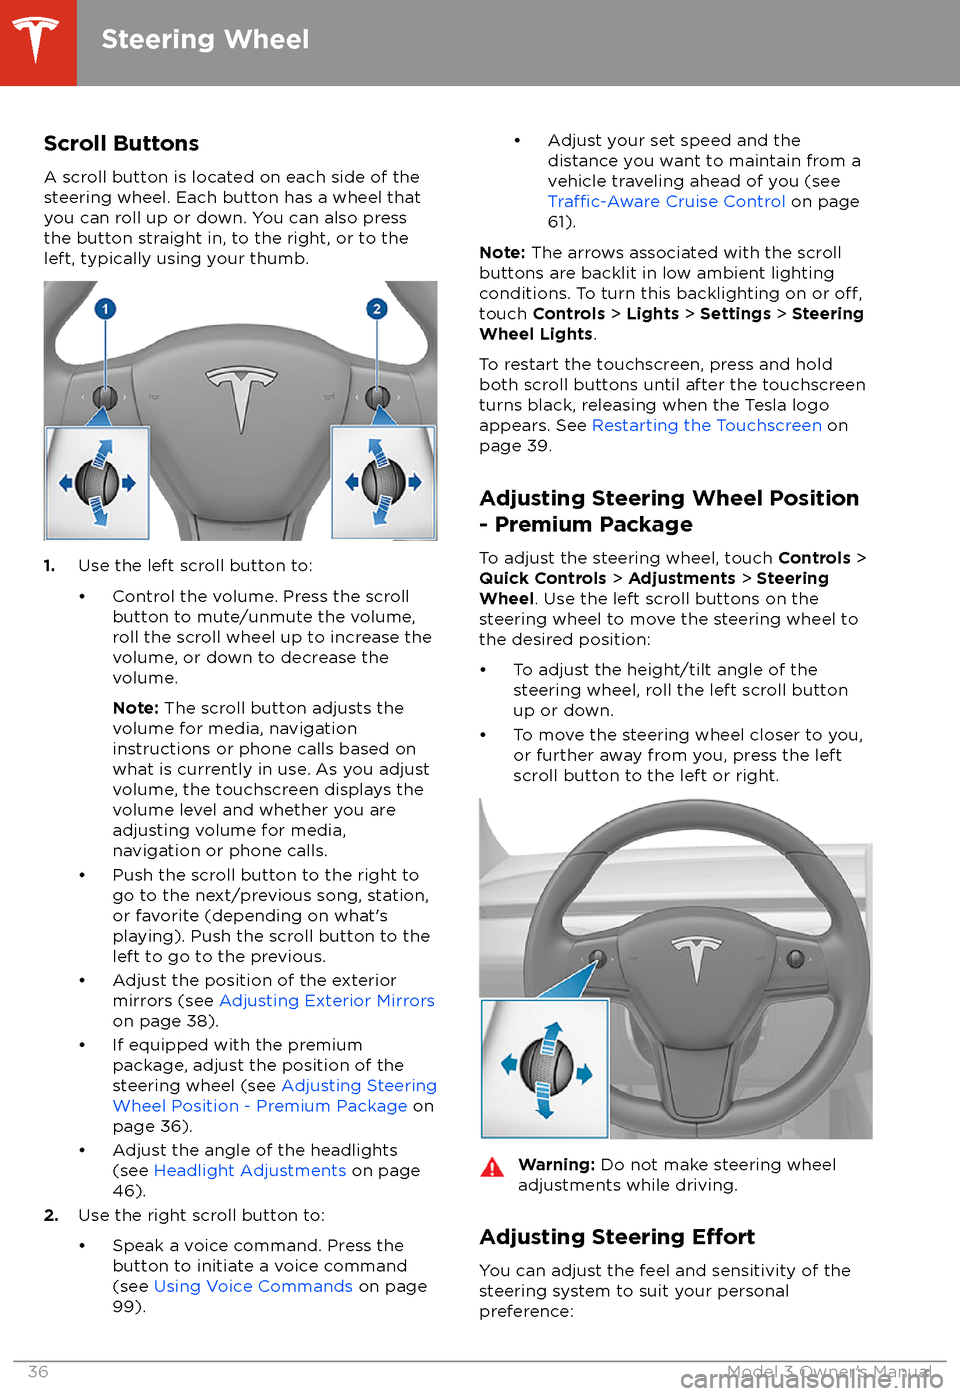 TESLA MODEL 3 2018 Owners Guide Scroll ButtonsA scroll button is located on each side of the
steering wheel. Each button has a wheel that
you can roll up or down. You can also press
the button straight in, to the right, or to the le